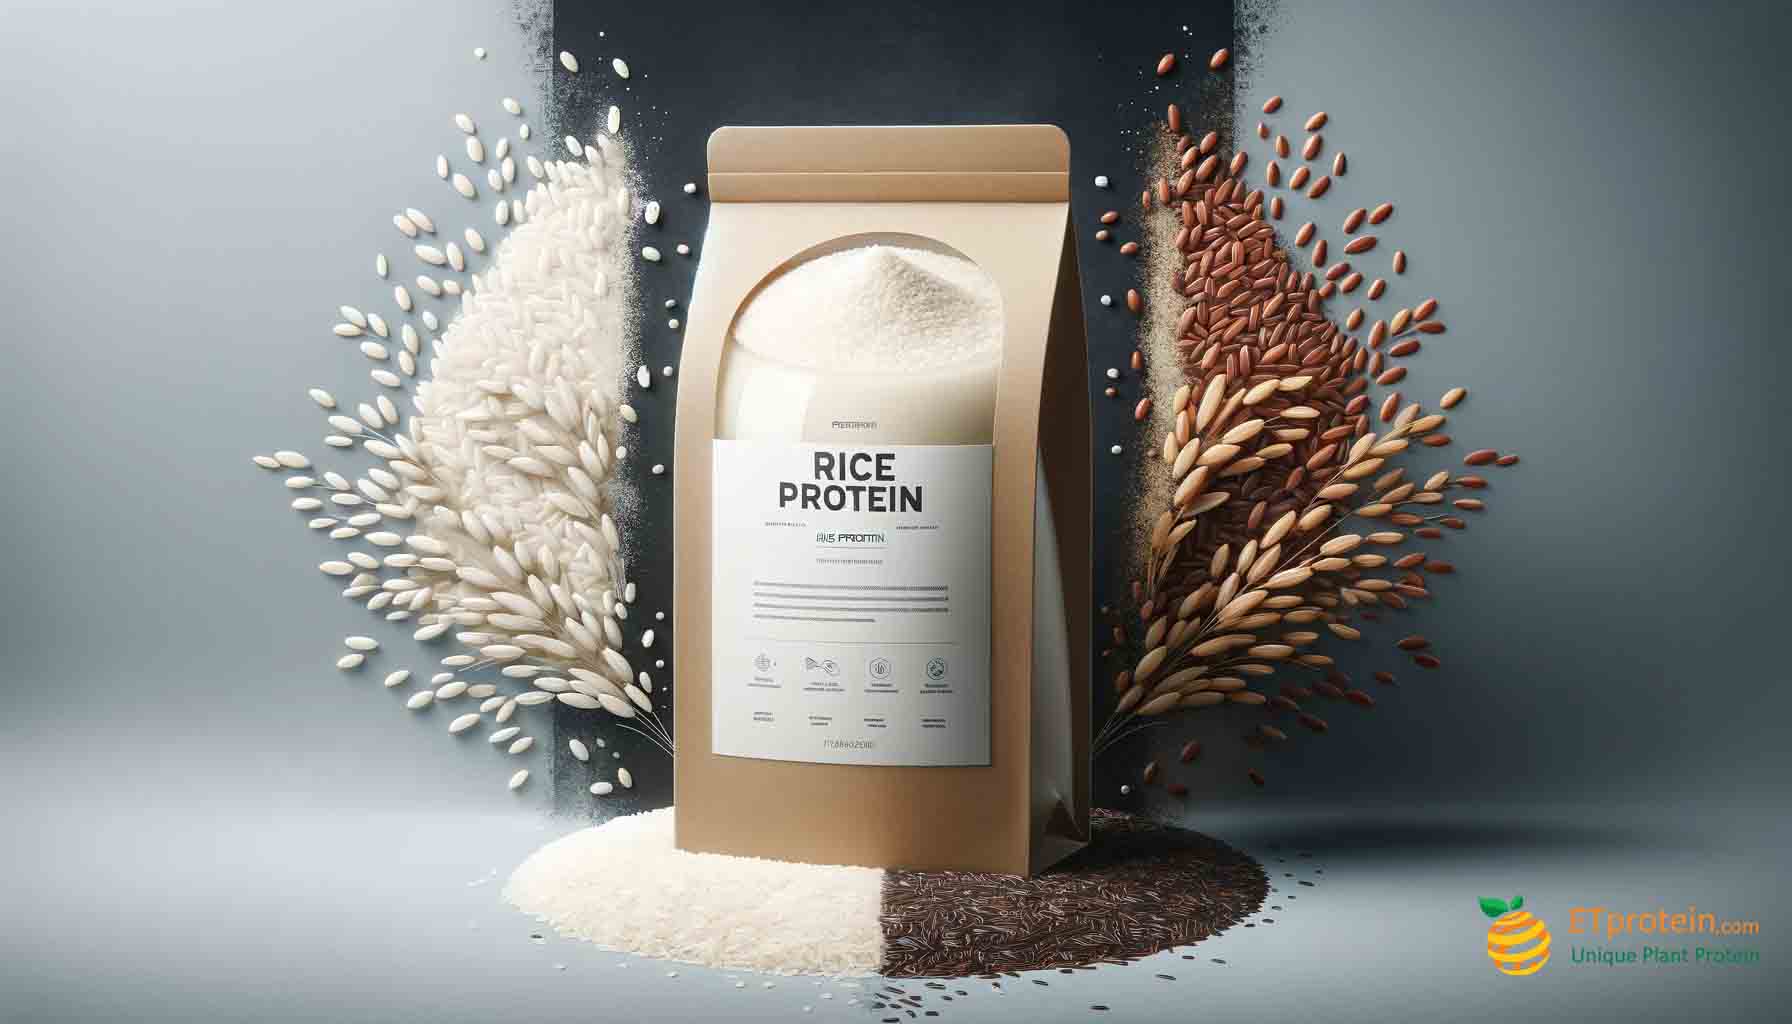 The Perfect Protein Pairings for Red Beans and Rice.Explore ideal protein pairings for red beans and rice, featuring ETprotein's rice protein for a nutritious, flavorful meal choice.